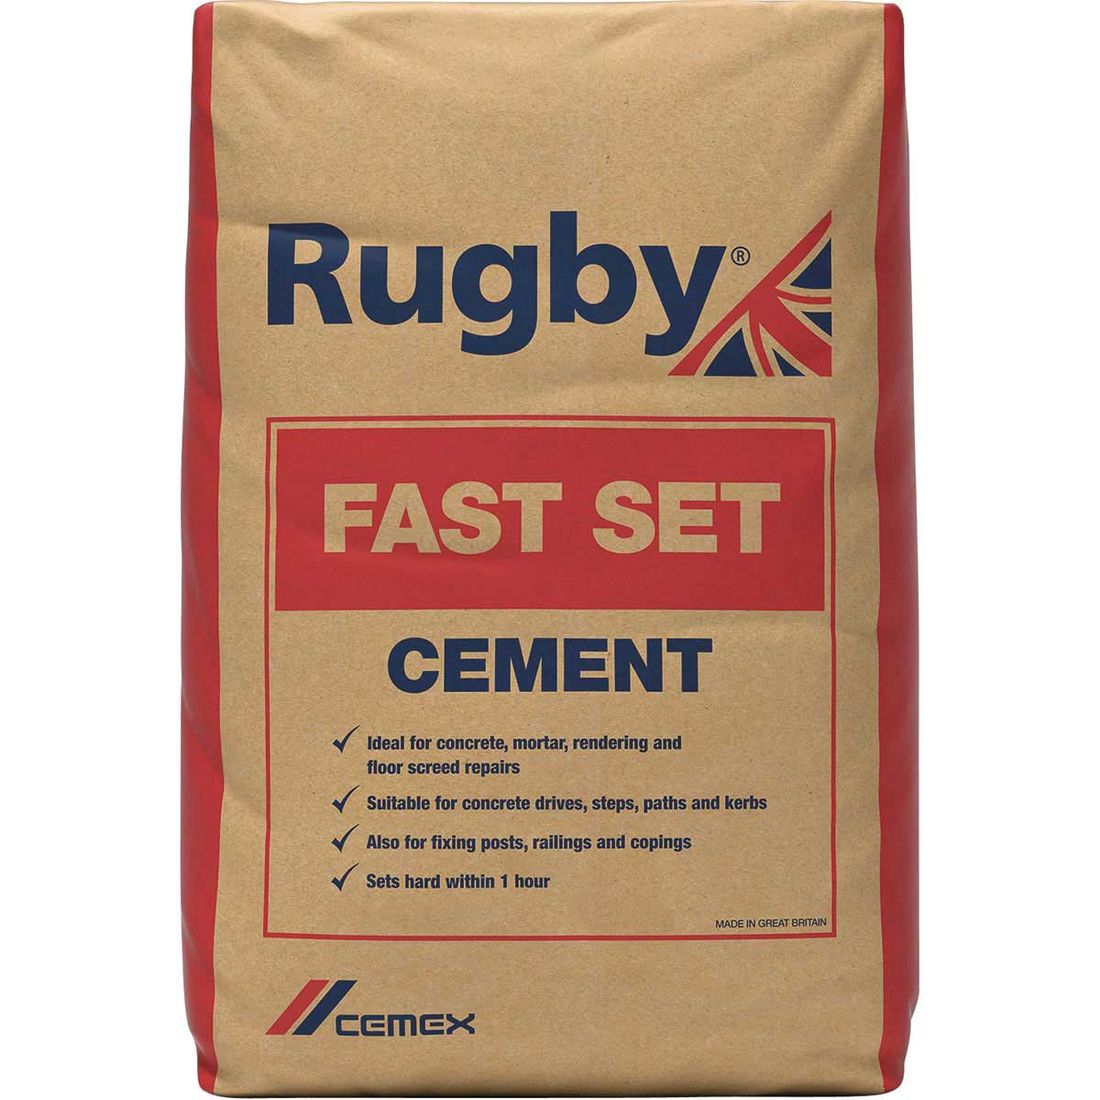 Rugby Fastset Cement 25Kg